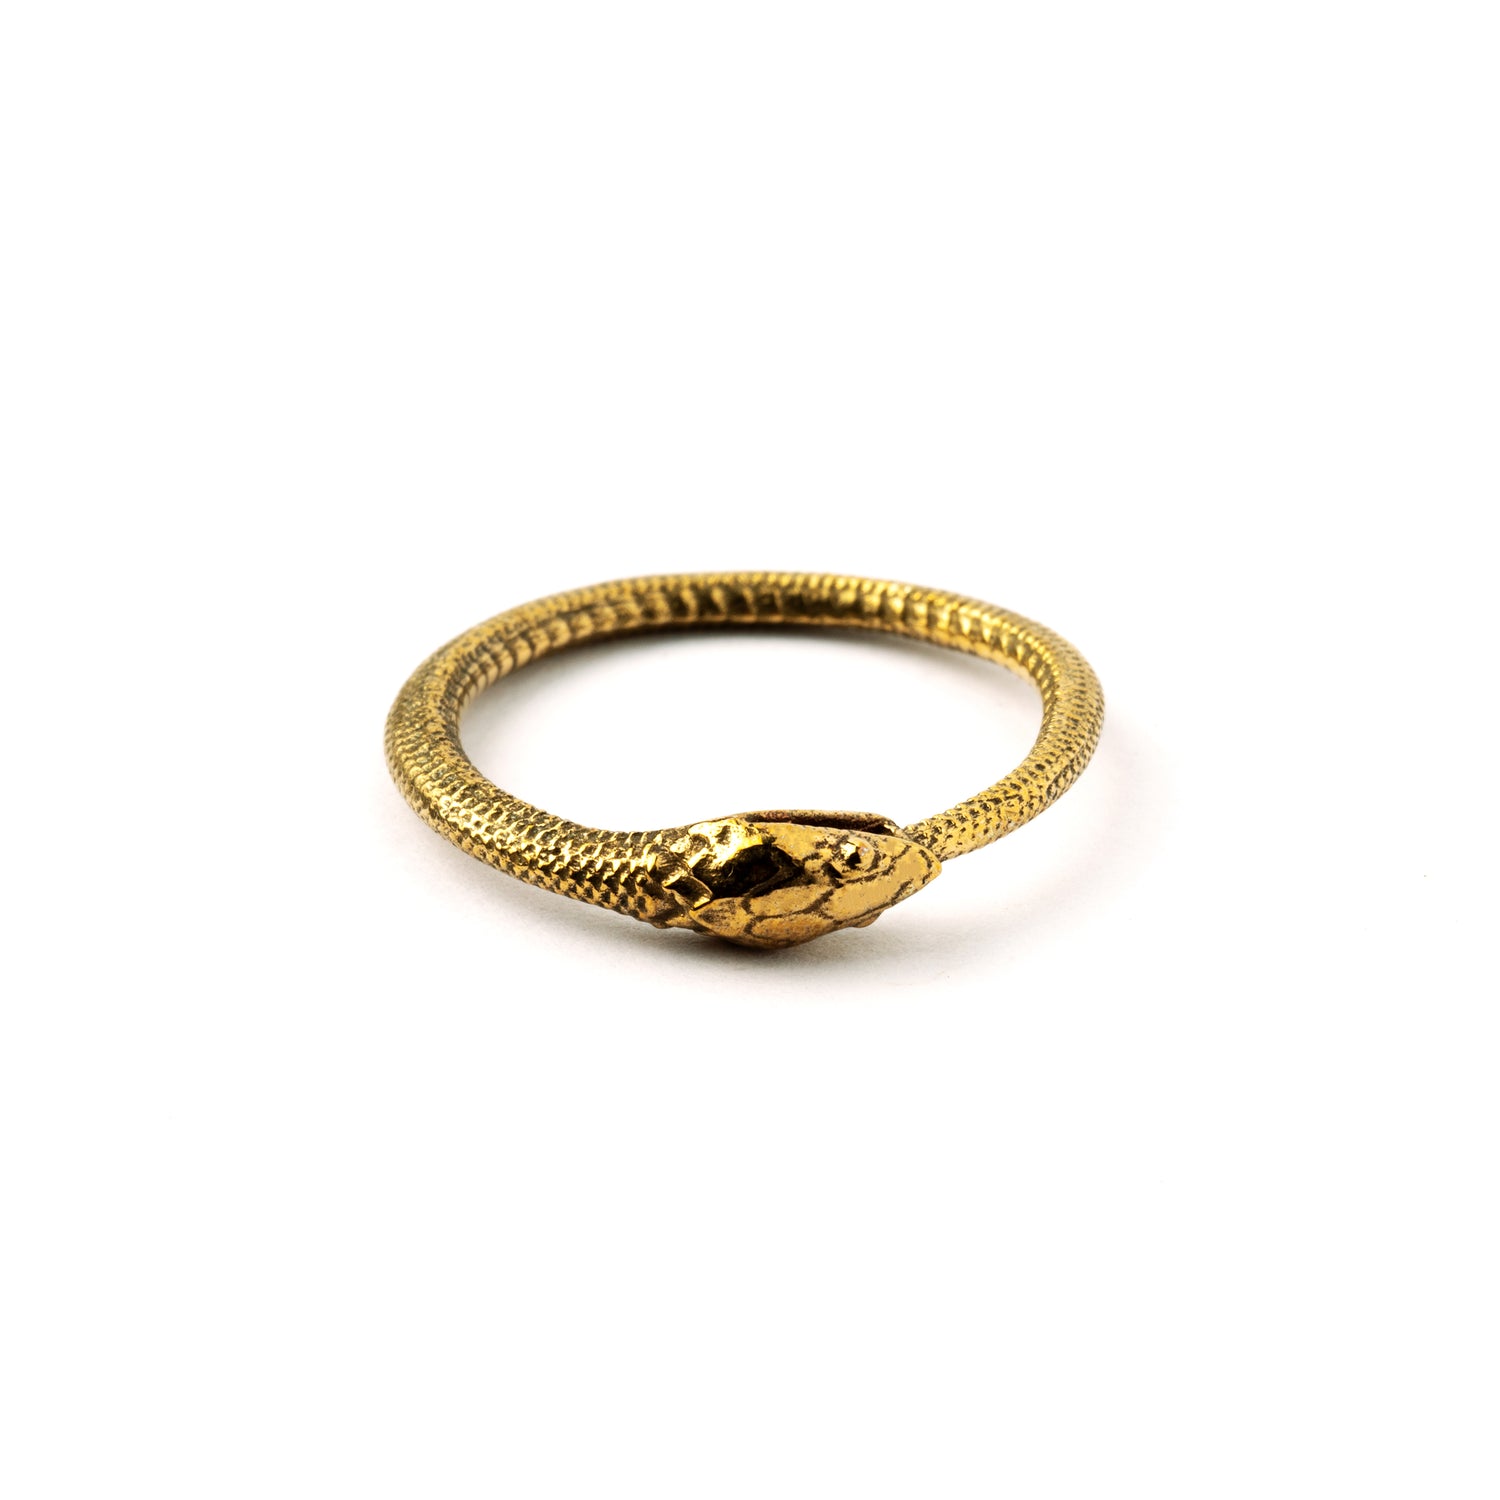 Bronze Ouroboros snake band ring frontal view